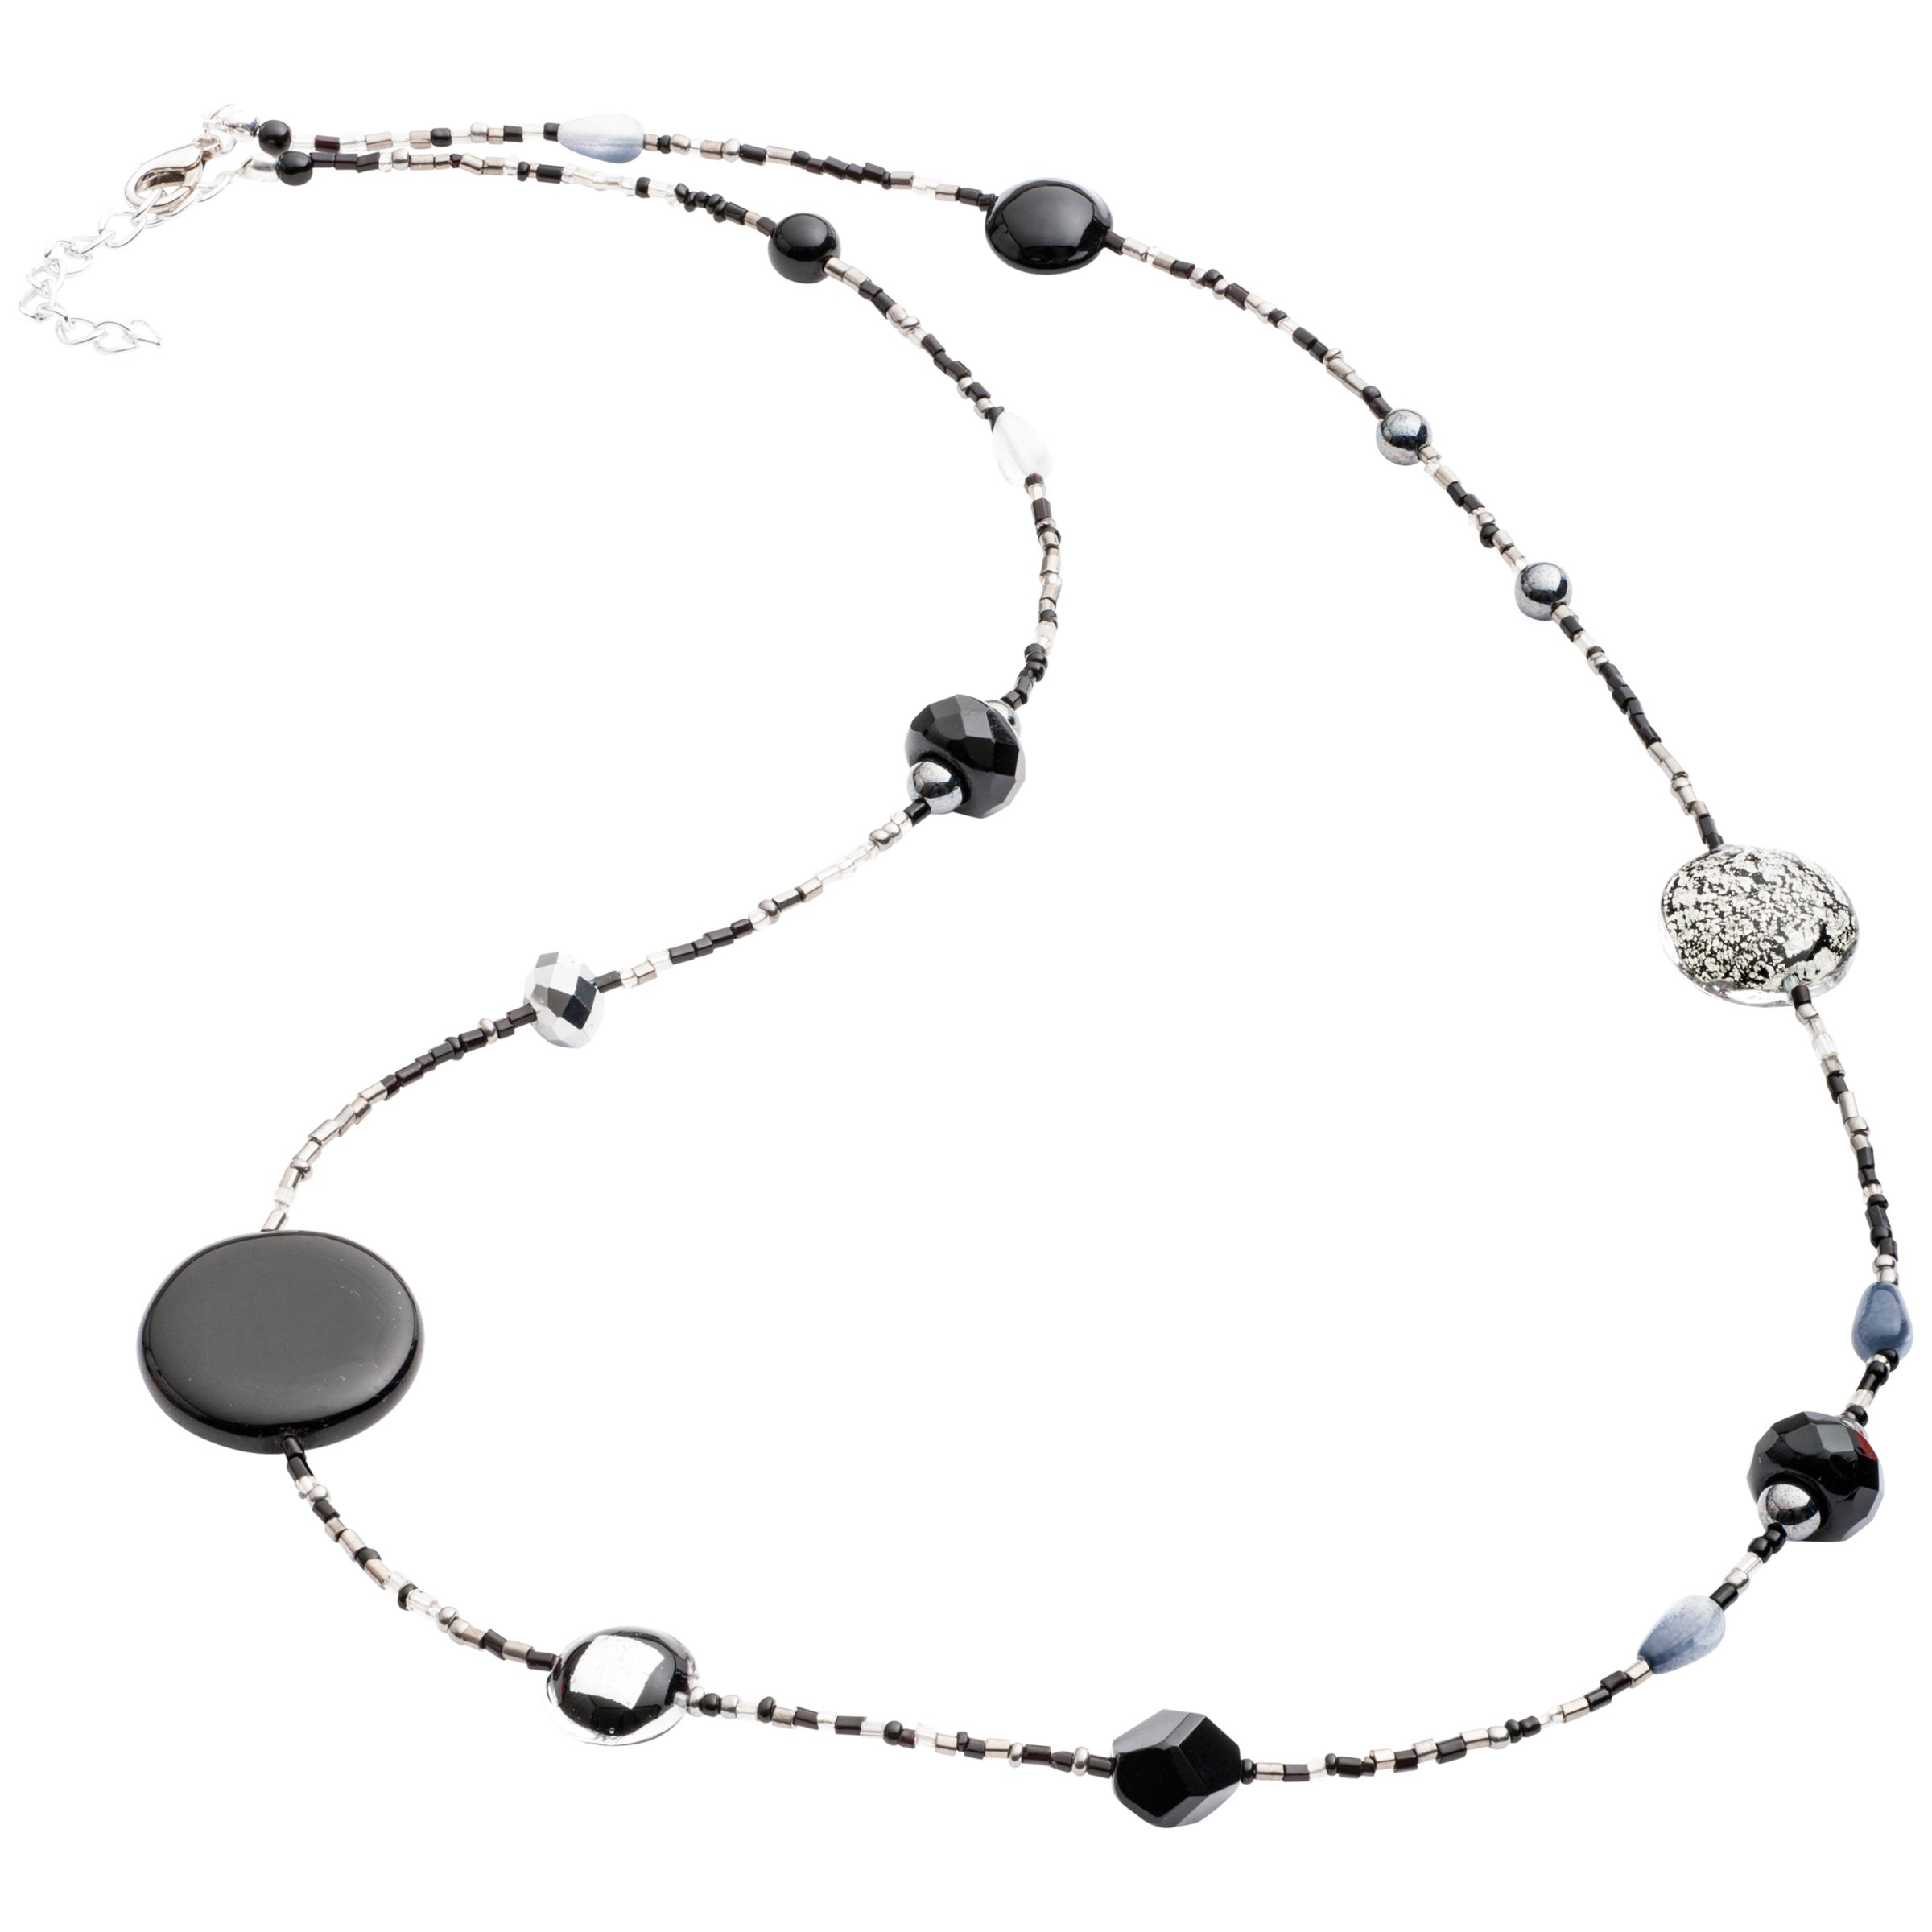 Martick Galaxy Murano Glass and Crystal Long Necklace, Charcoal/Silver